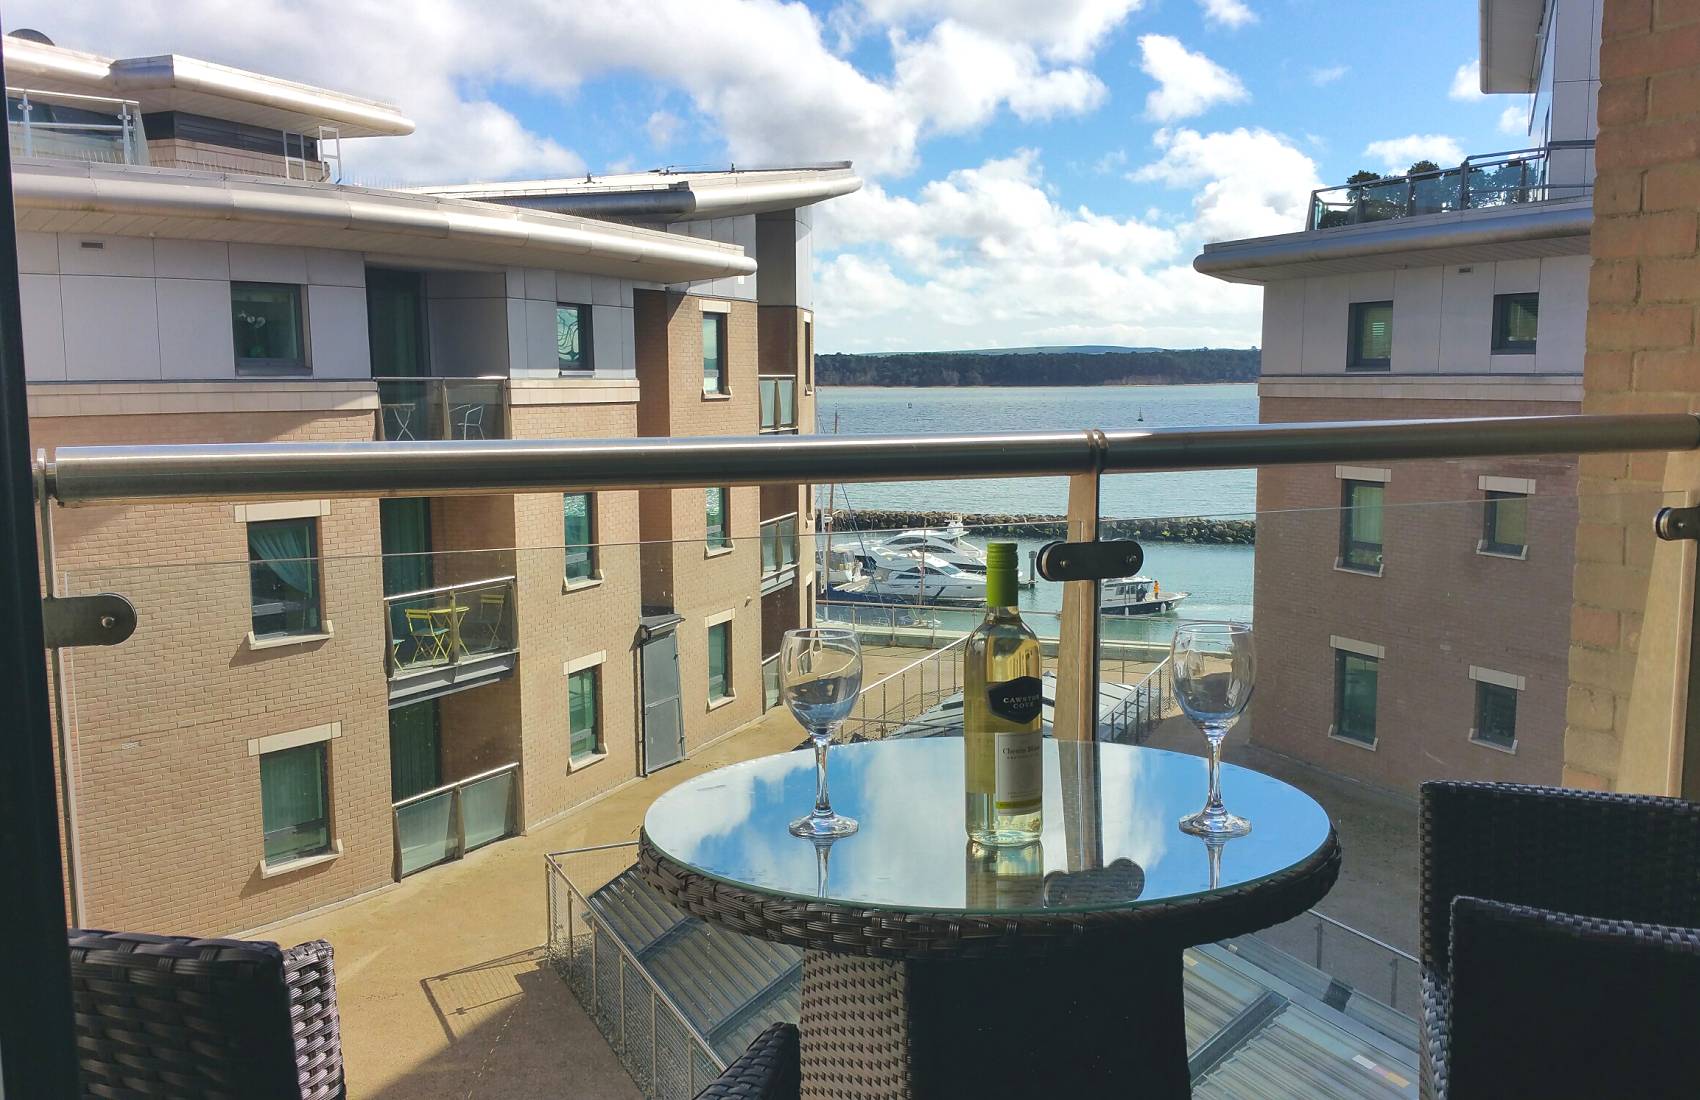 Balcony Views of Poole Harbour